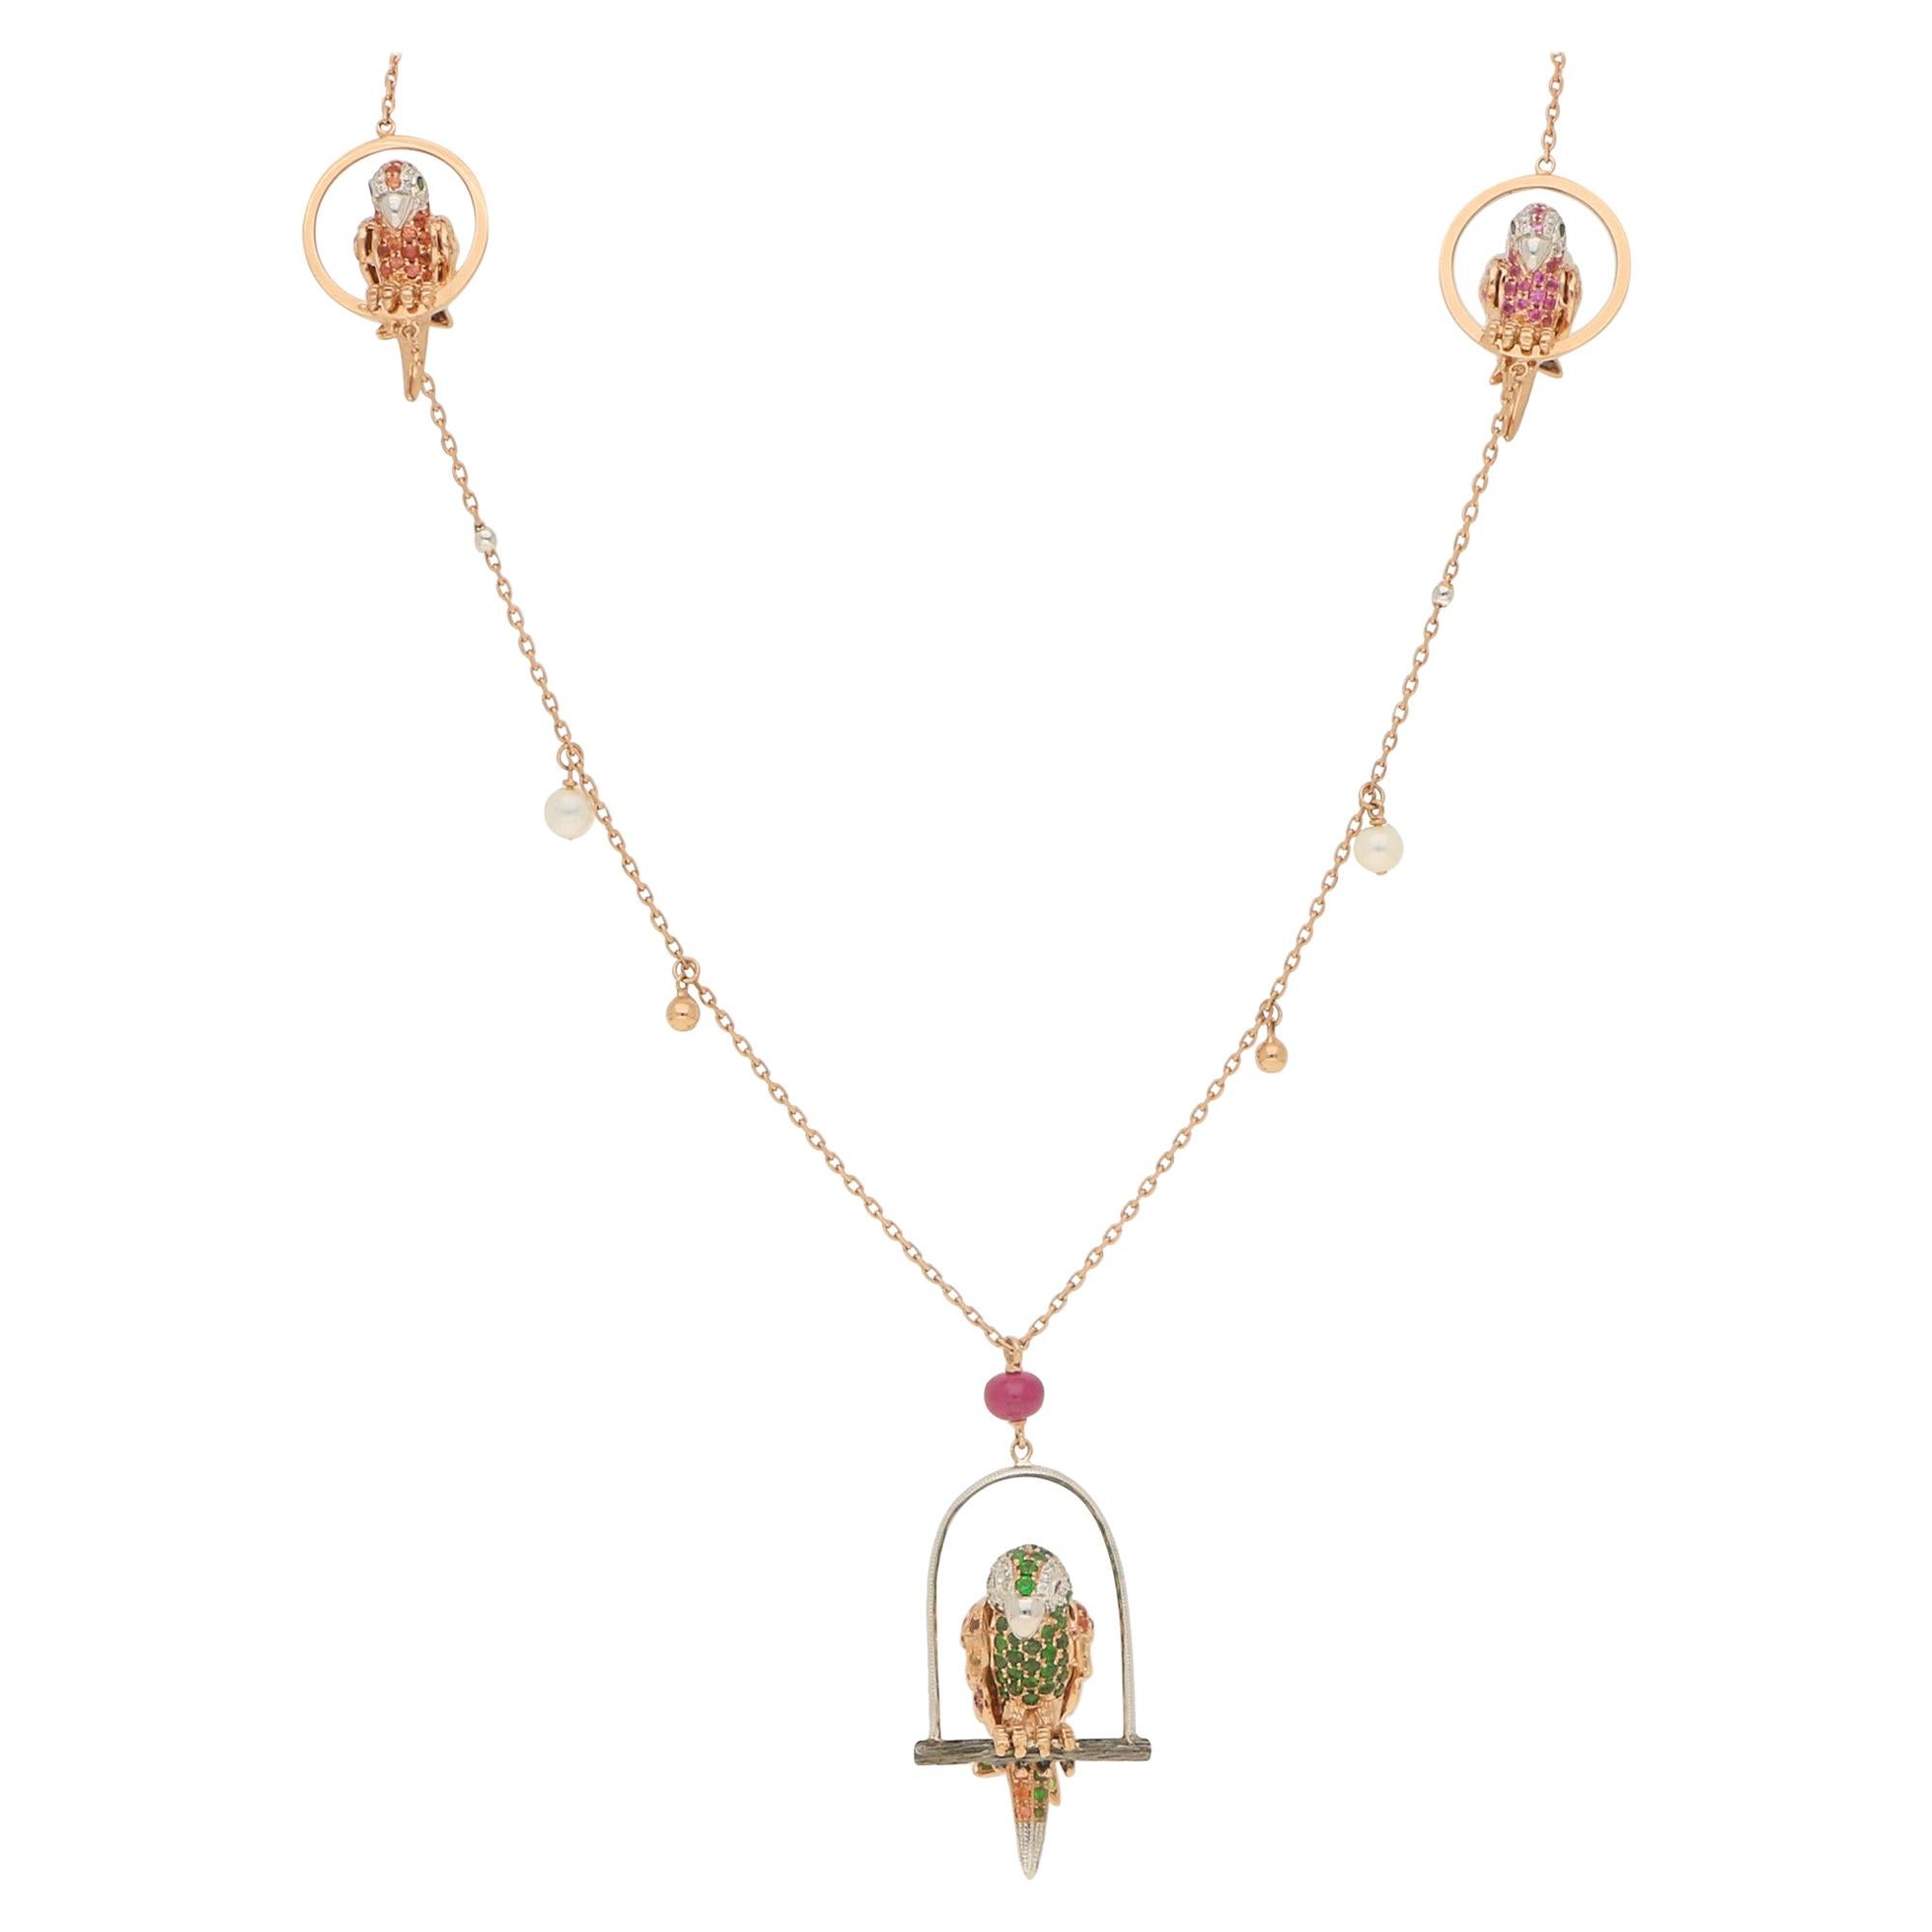 Multi-Colored Garnet, Sapphire and Diamond Parrot Necklace Set in 18 Karat Gold